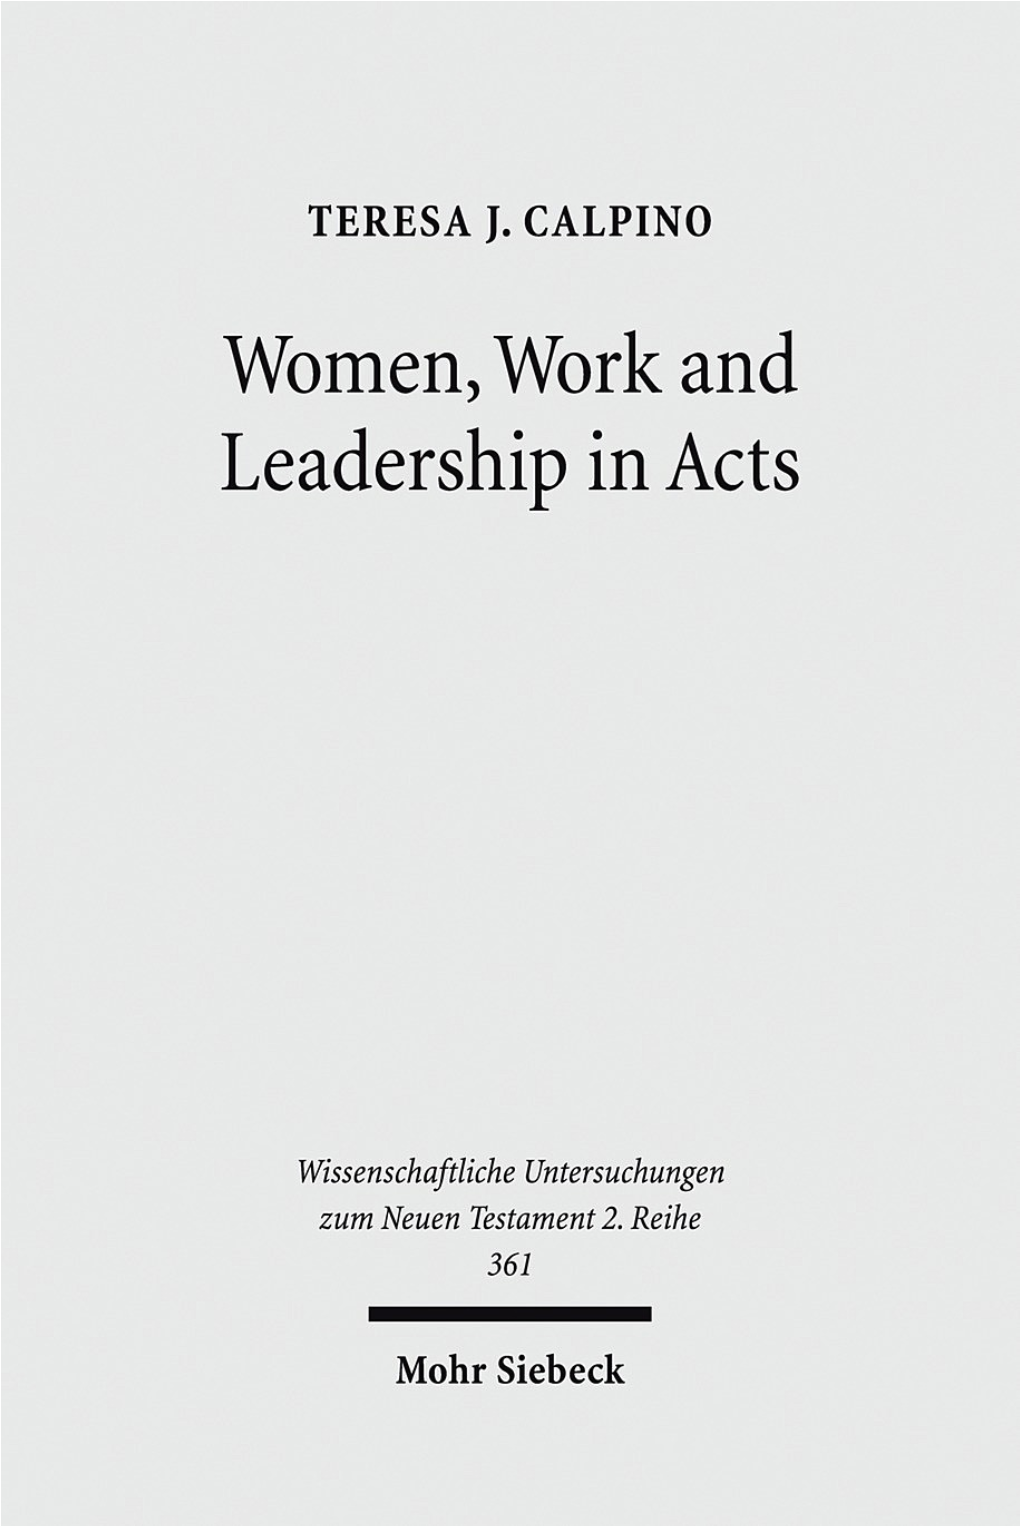 Women, Work and Leadership in Acts